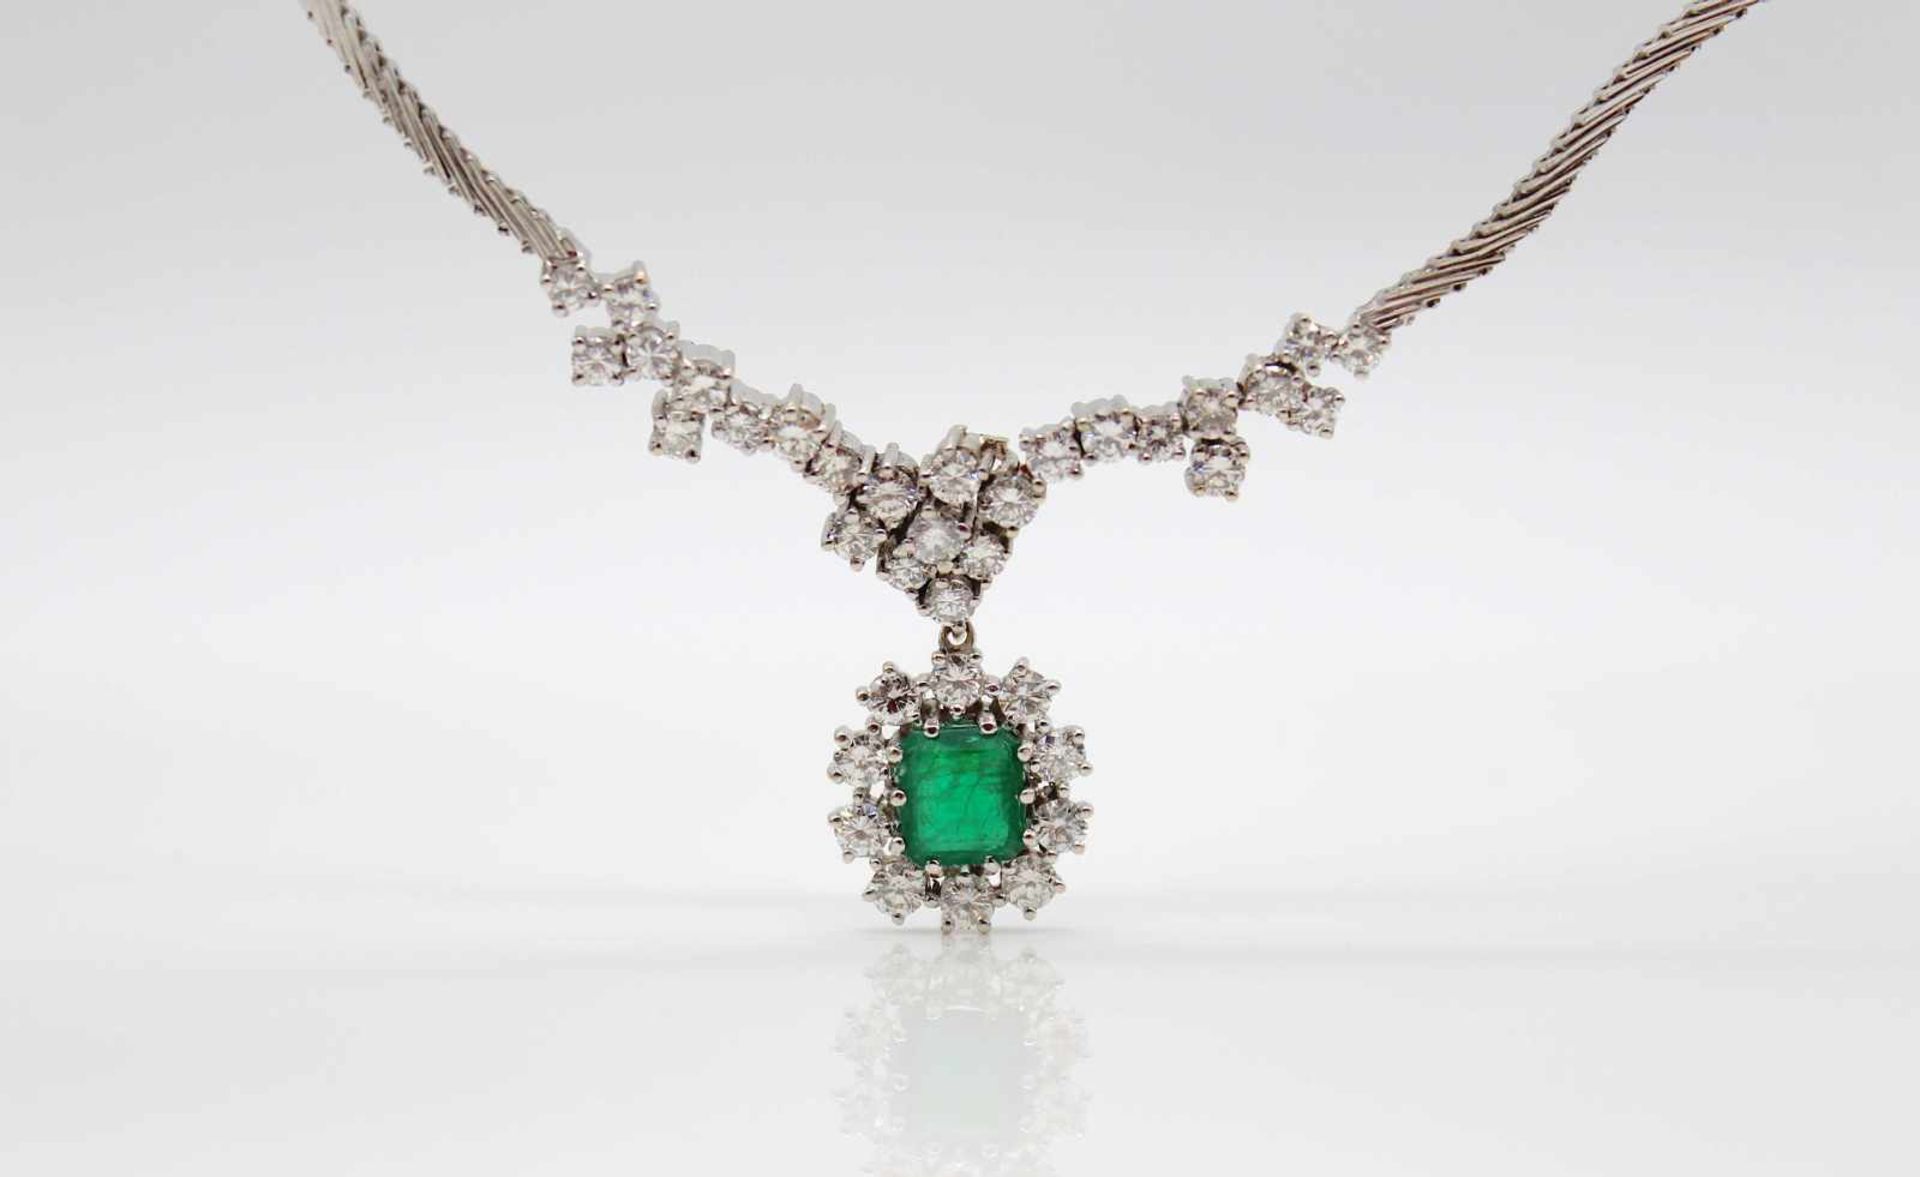 Necklace in 585 white gold with an emerald about 1.4 ct and 36 diamonds, total about 3.4 ct in